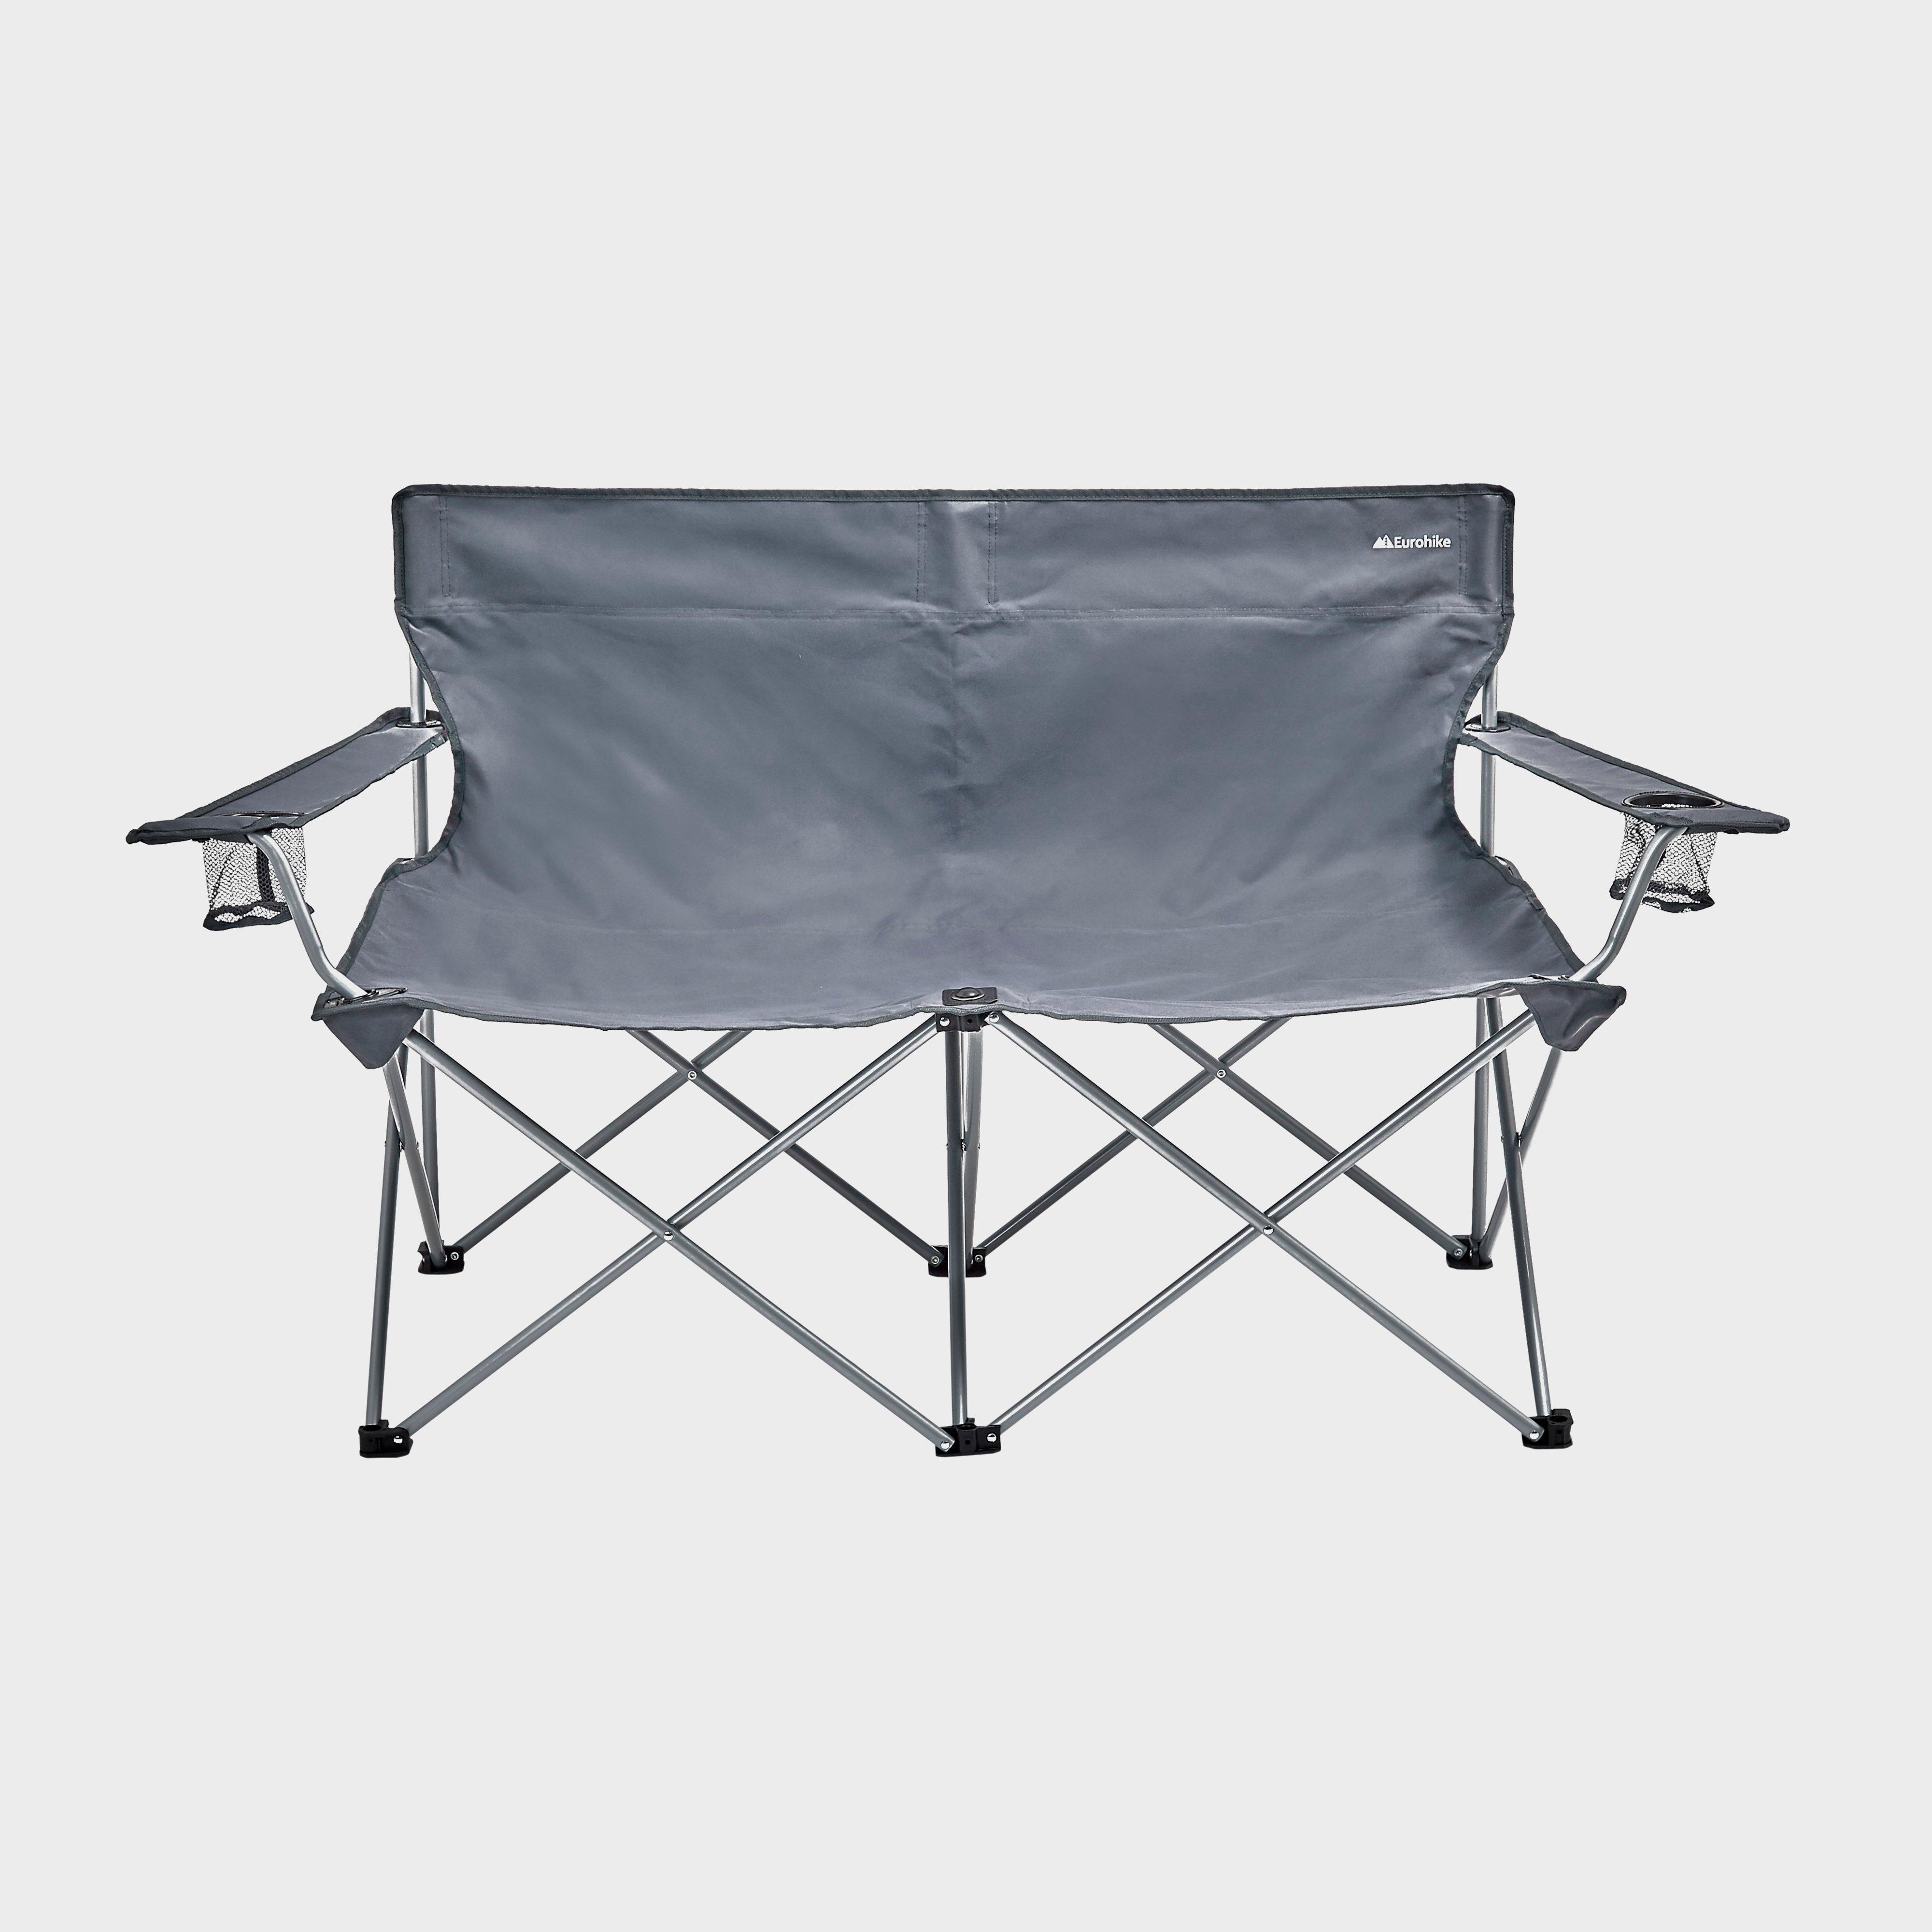 Outwell Goya XL Folding Camping Chair Review